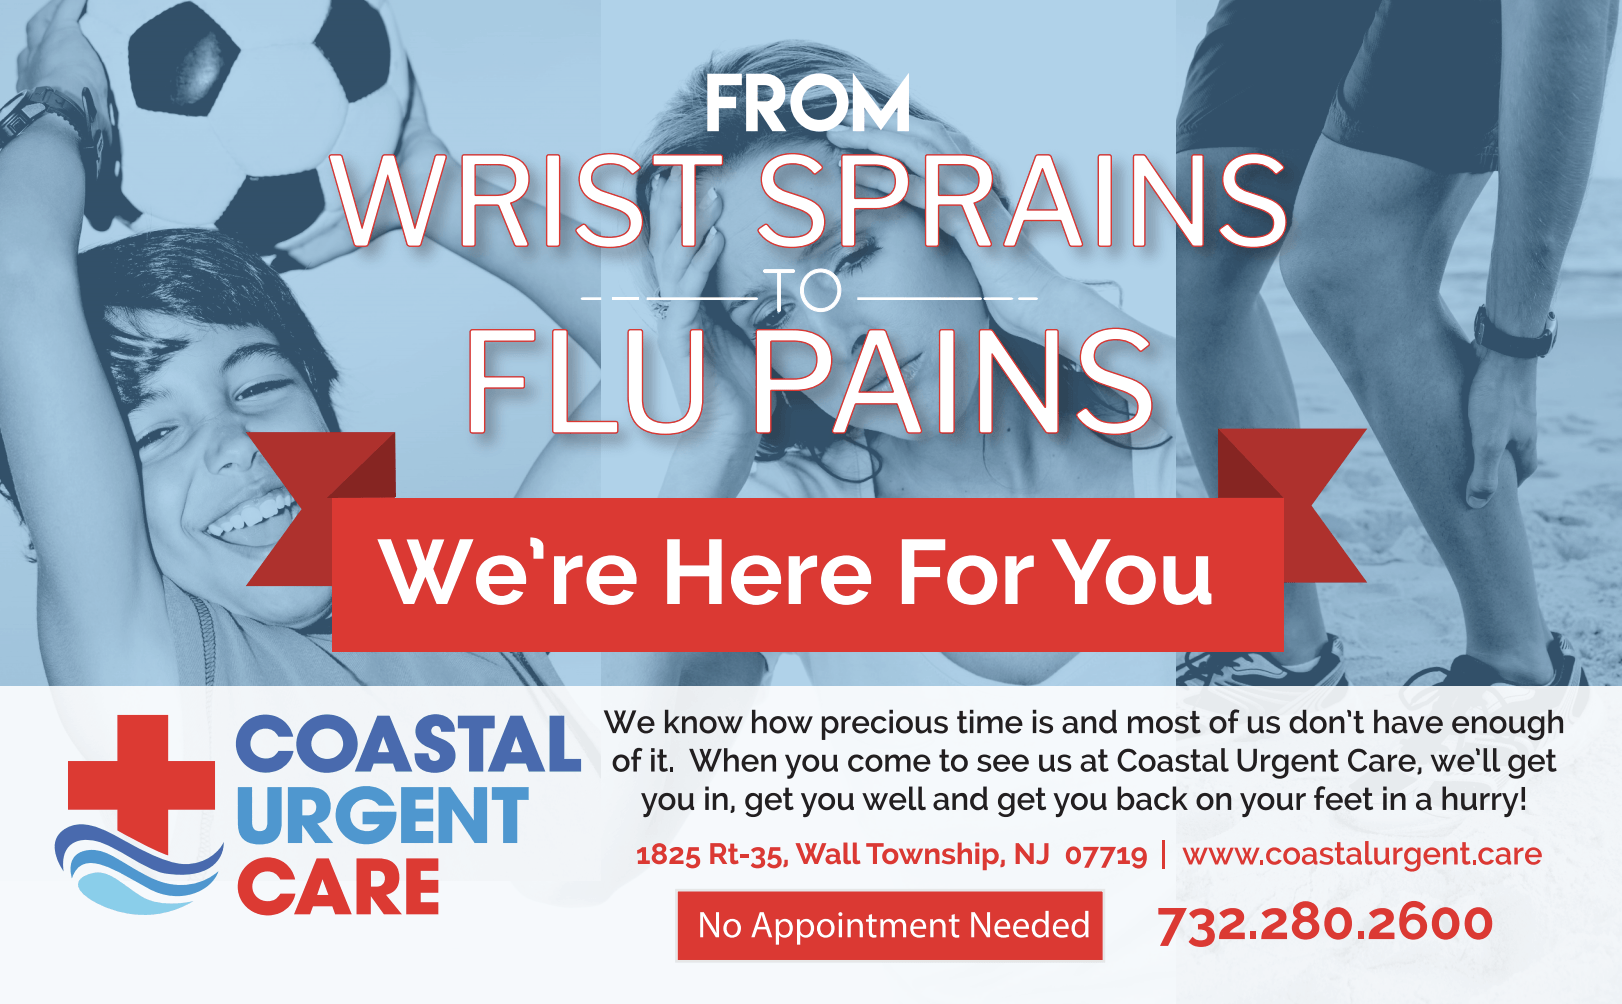 A poster for coastal urgent care that says from wrist sprains to flu pains